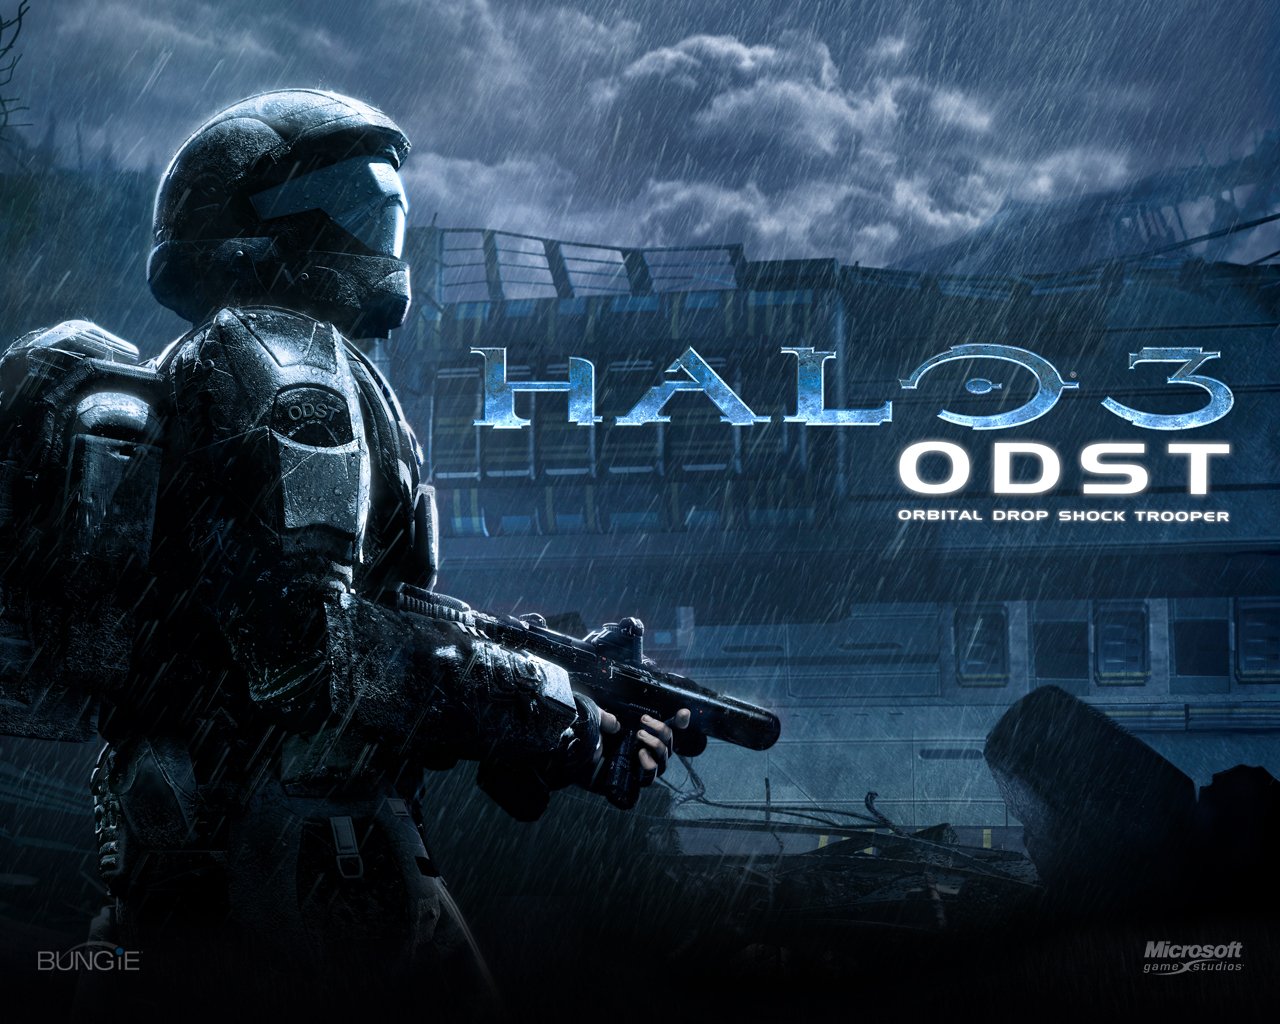 Lets Remember Reach Halo 3 ODST since MS343 doesnt want to